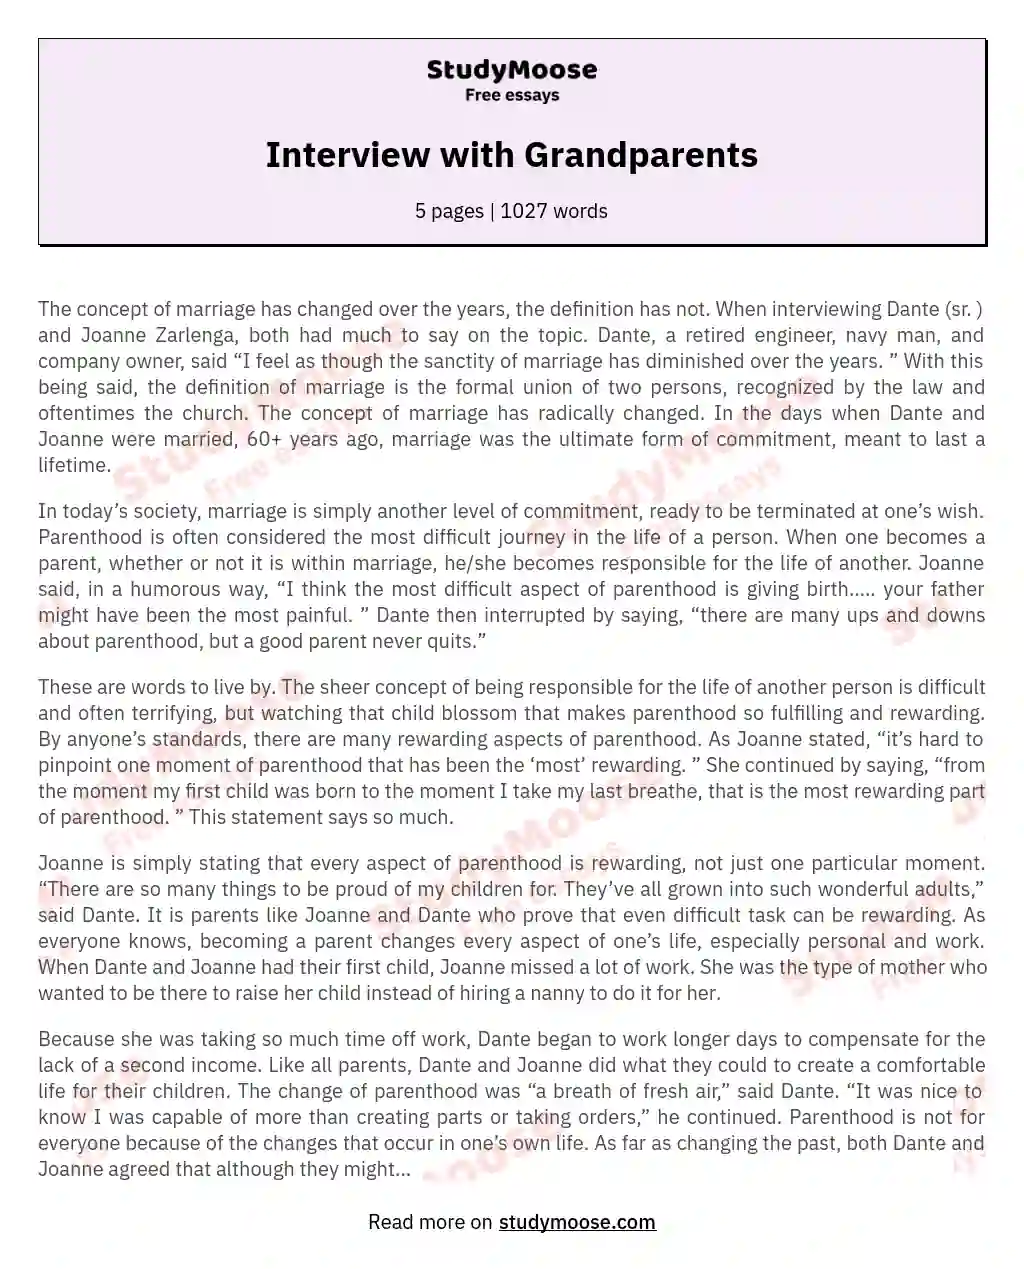 Interview with Grandparents essay